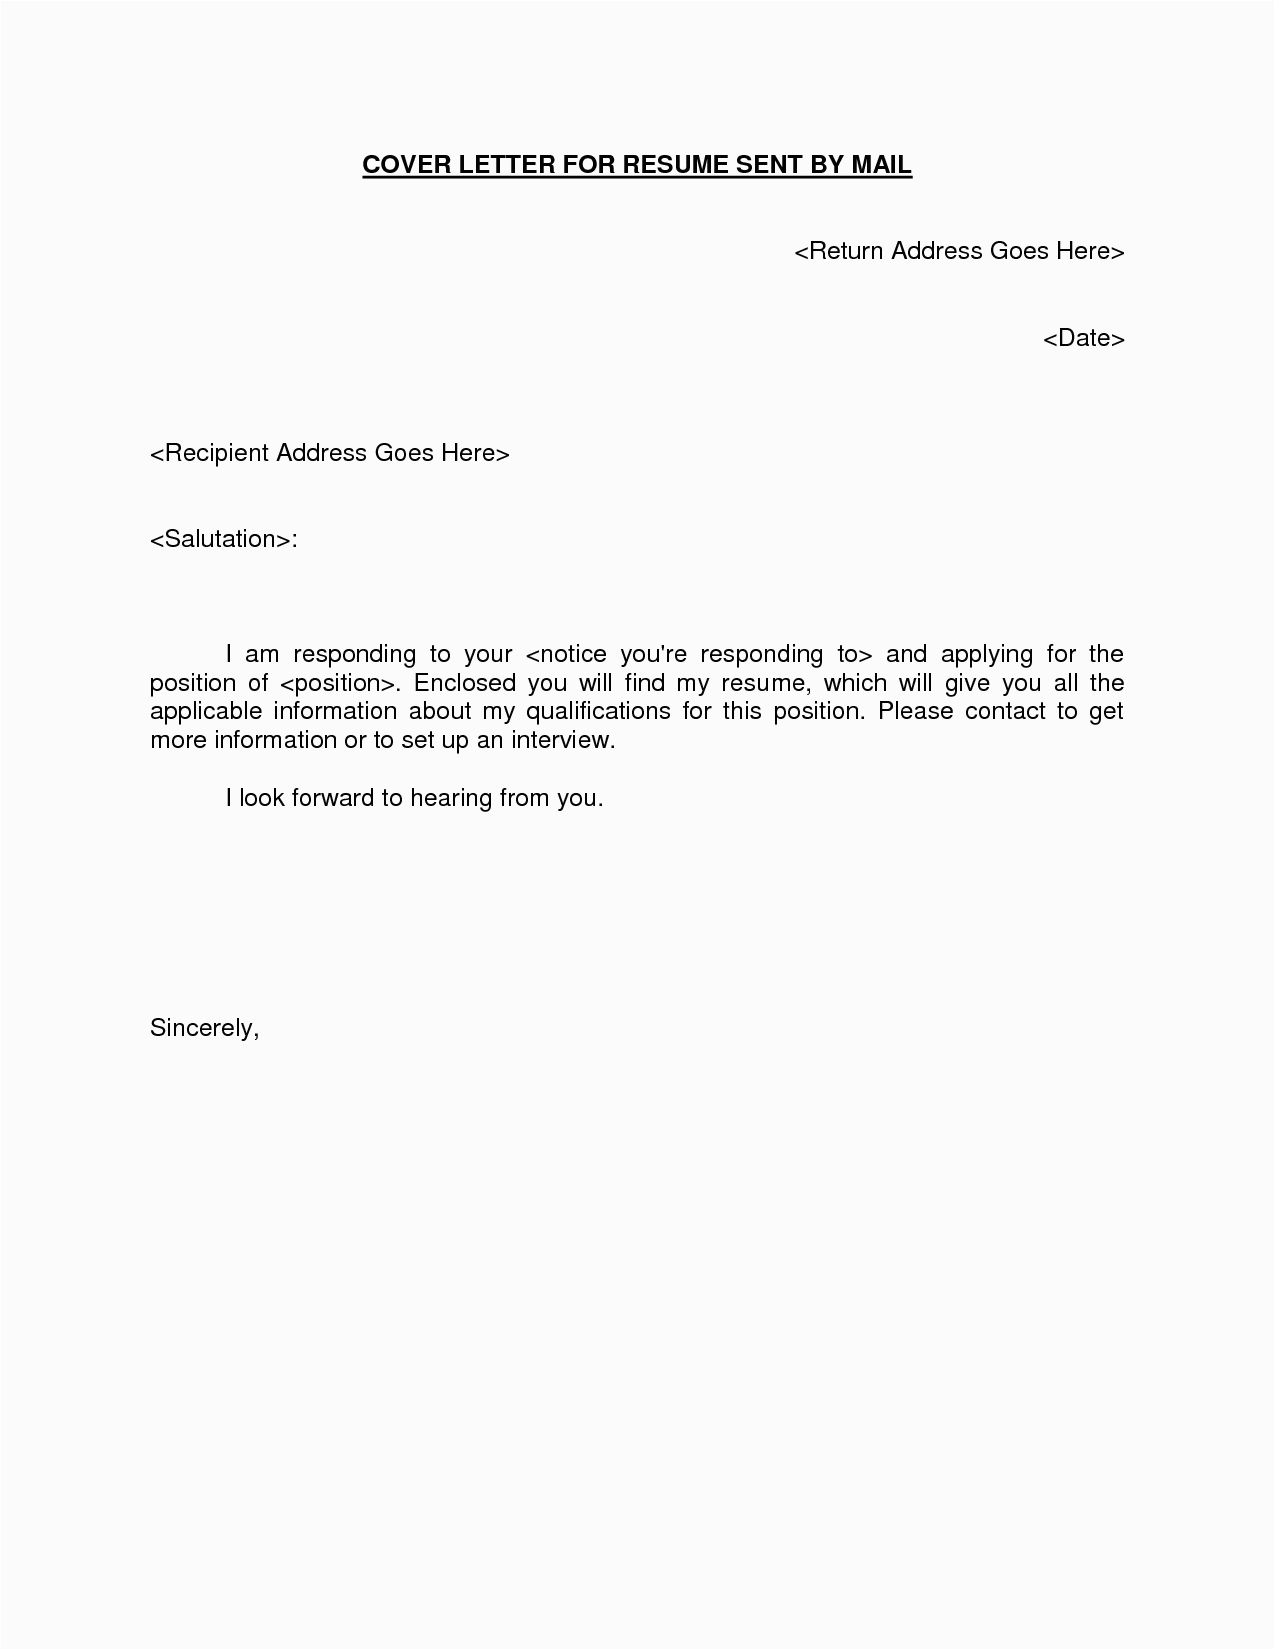 Email Cover Letter Samples for A Resume Submission Resume and Cover Letters